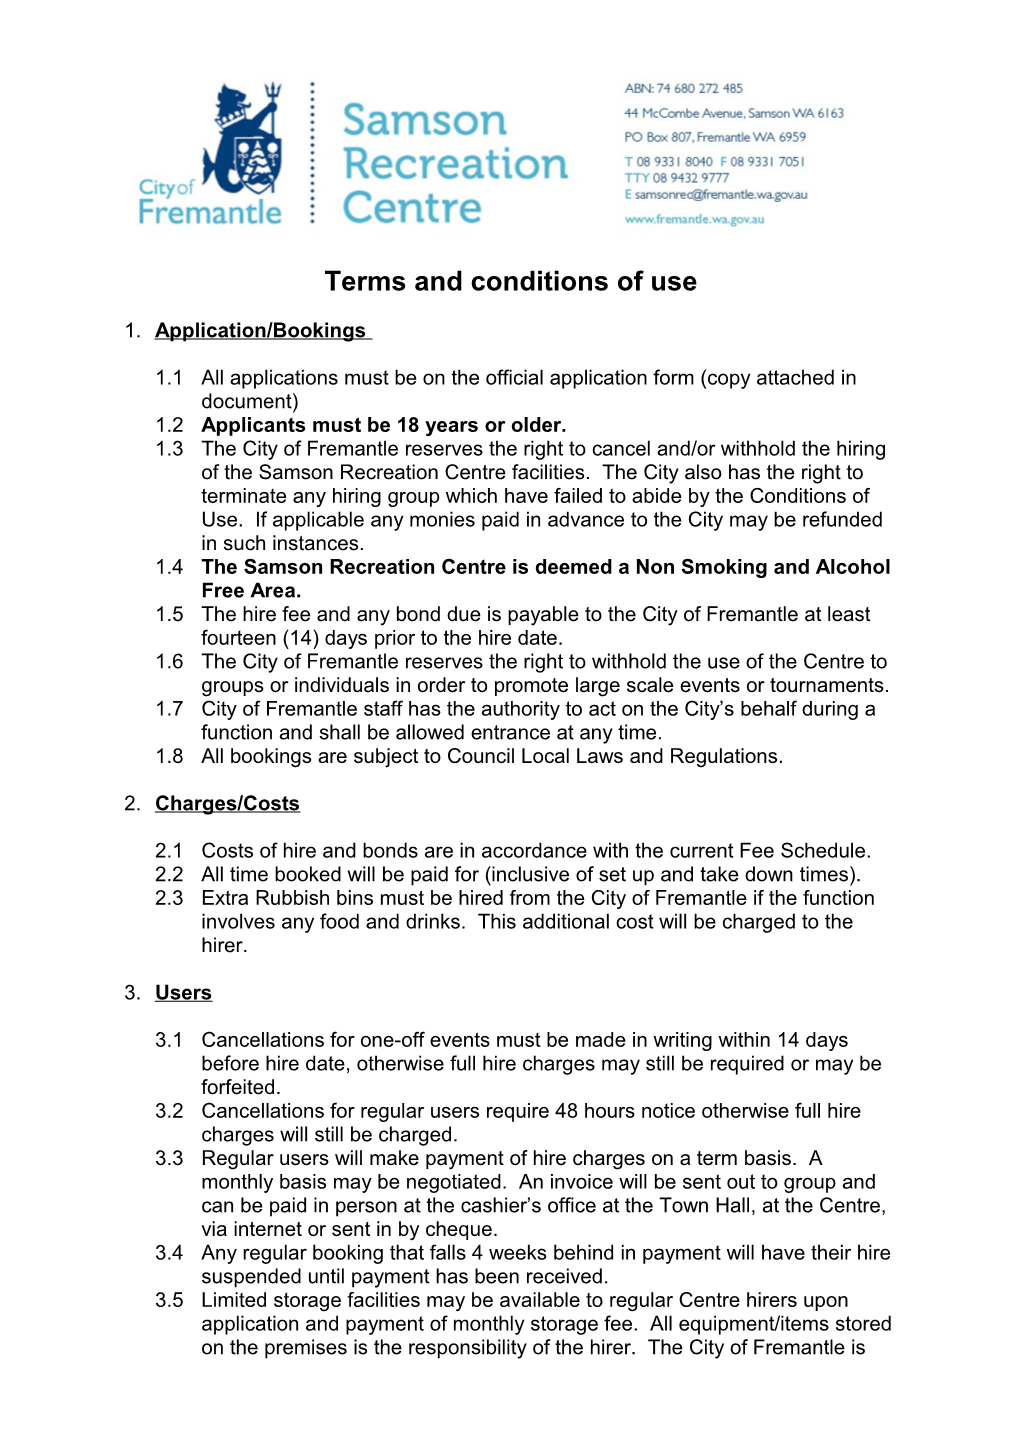 Terms and Conditions of Use s2